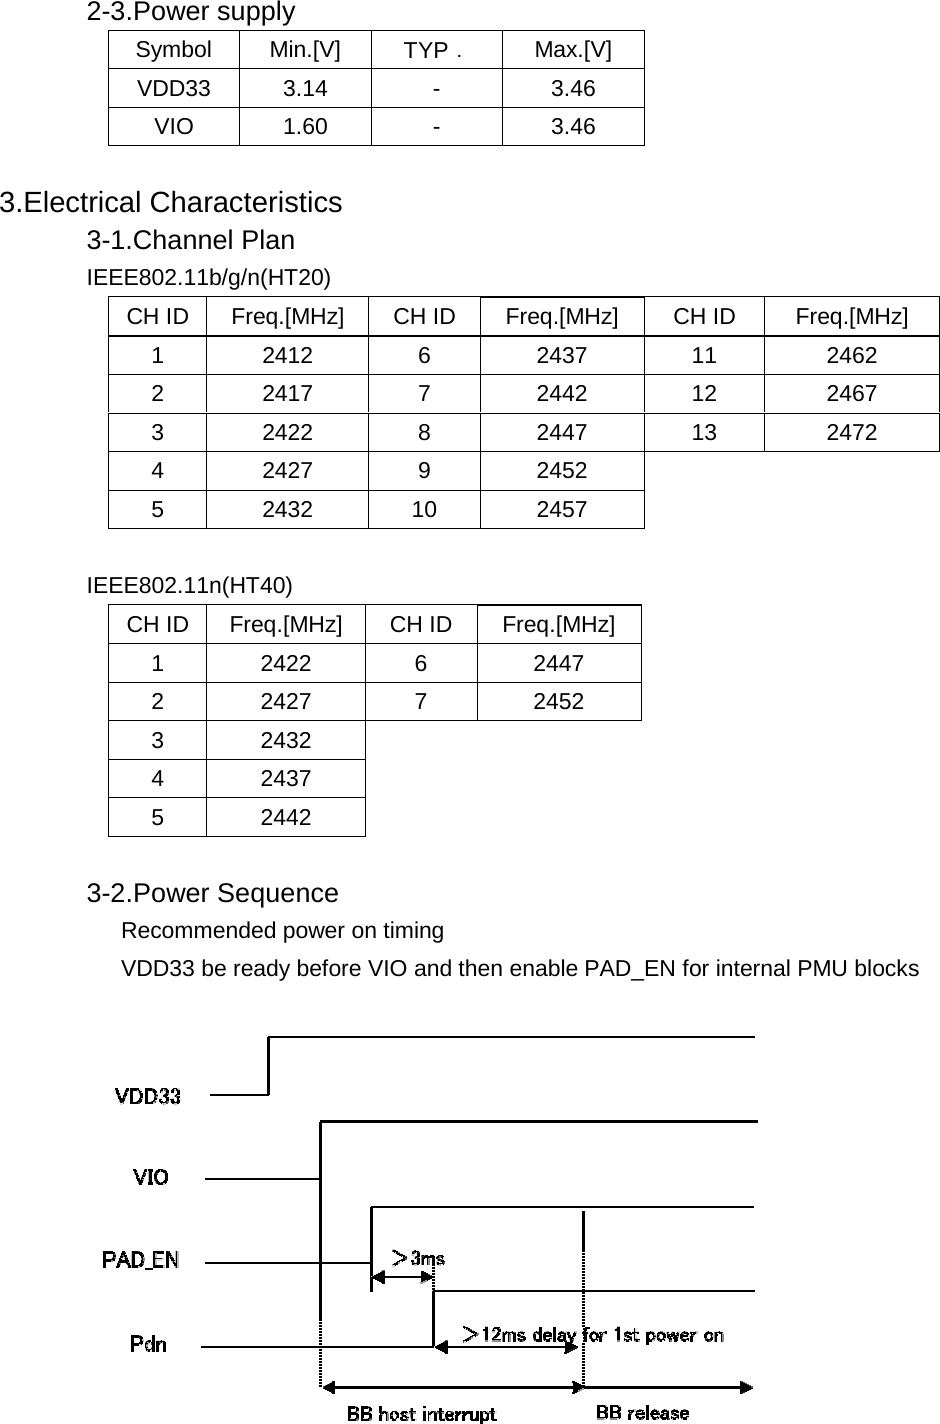    2-3.Power supply     Symbol Min.[V]  TYP． Max.[V] VDD33 3.14  -  3.46 VIO 1.60  -  3.46  3.Electrical Characteristics          3-1.Channel Plan            IEEE802.11b/g/n(HT20)       CH ID  Freq.[MHz]  CH ID  Freq.[MHz]  CH ID  Freq.[MHz] 1 2412  6  2437  11  2462 2 2417  7  2442  12  2467 3 2422  8  2447  13  2472 4 2427  9  2452   5 2432 10 2457   IEEE802.11n(HT40)    CH ID  Freq.[MHz]  CH ID  Freq.[MHz]     1 2422  6  2447 2 2427  7  2452 3 2432   4 2437 5 2442   3-2.Power Sequence      Recommended power on timing         VDD33 be ready before VIO and then enable PAD_EN for internal PMU blocks              